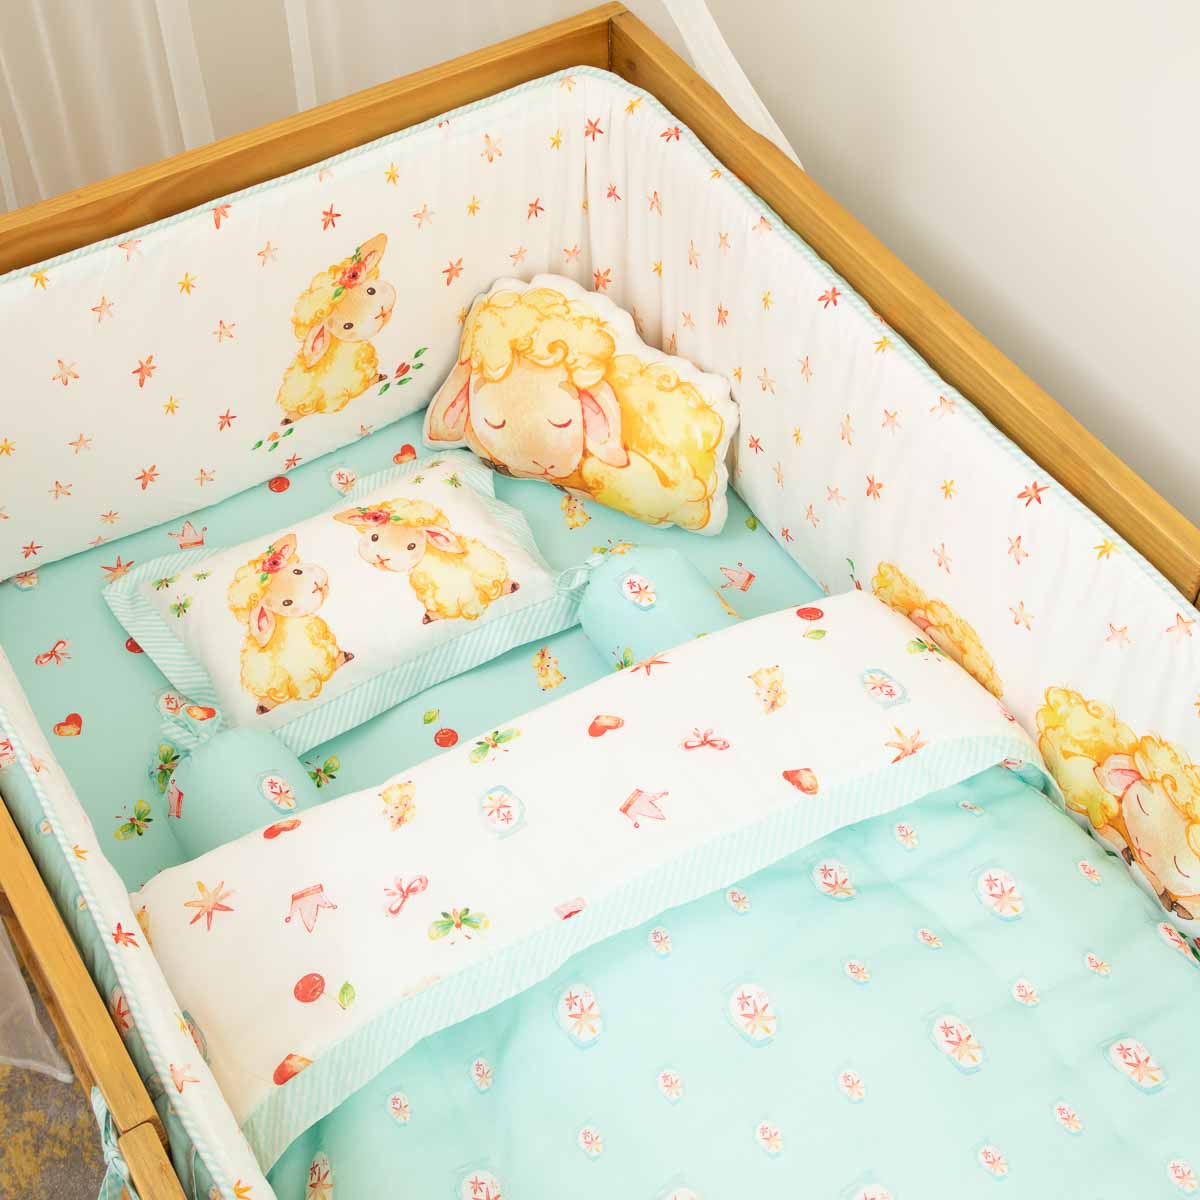 Fluffy the Sheep - Cot Bedding Set with Bumper - Blue